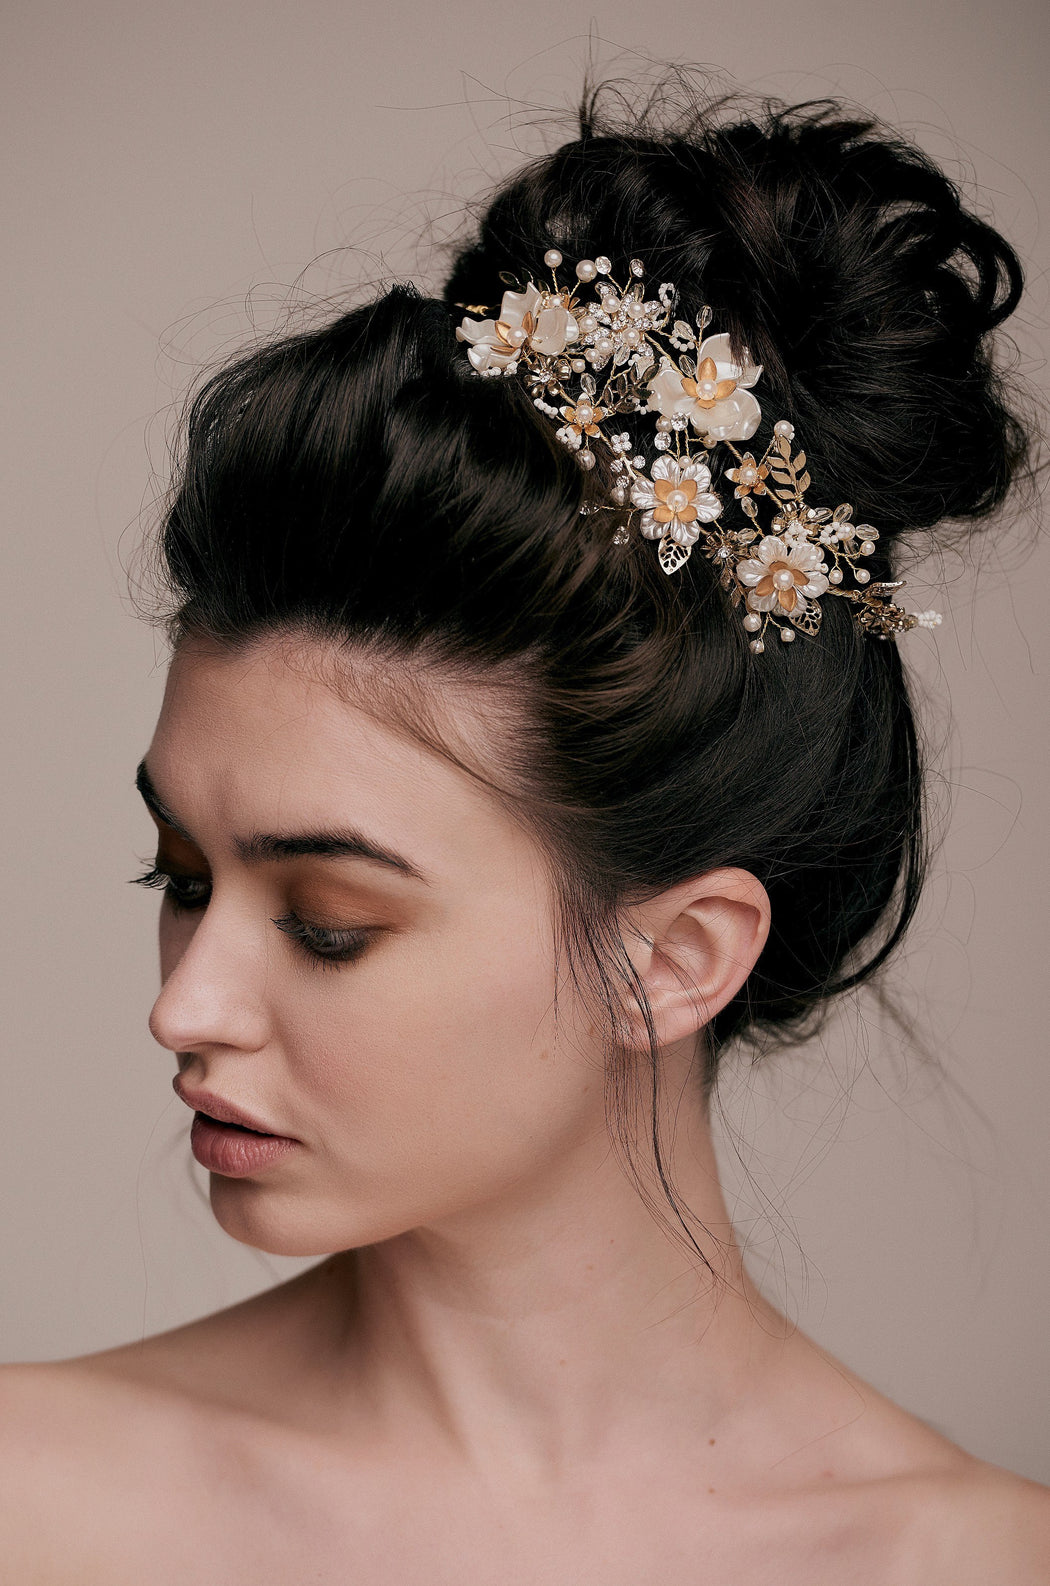 Image for wedding hairstyle with rose